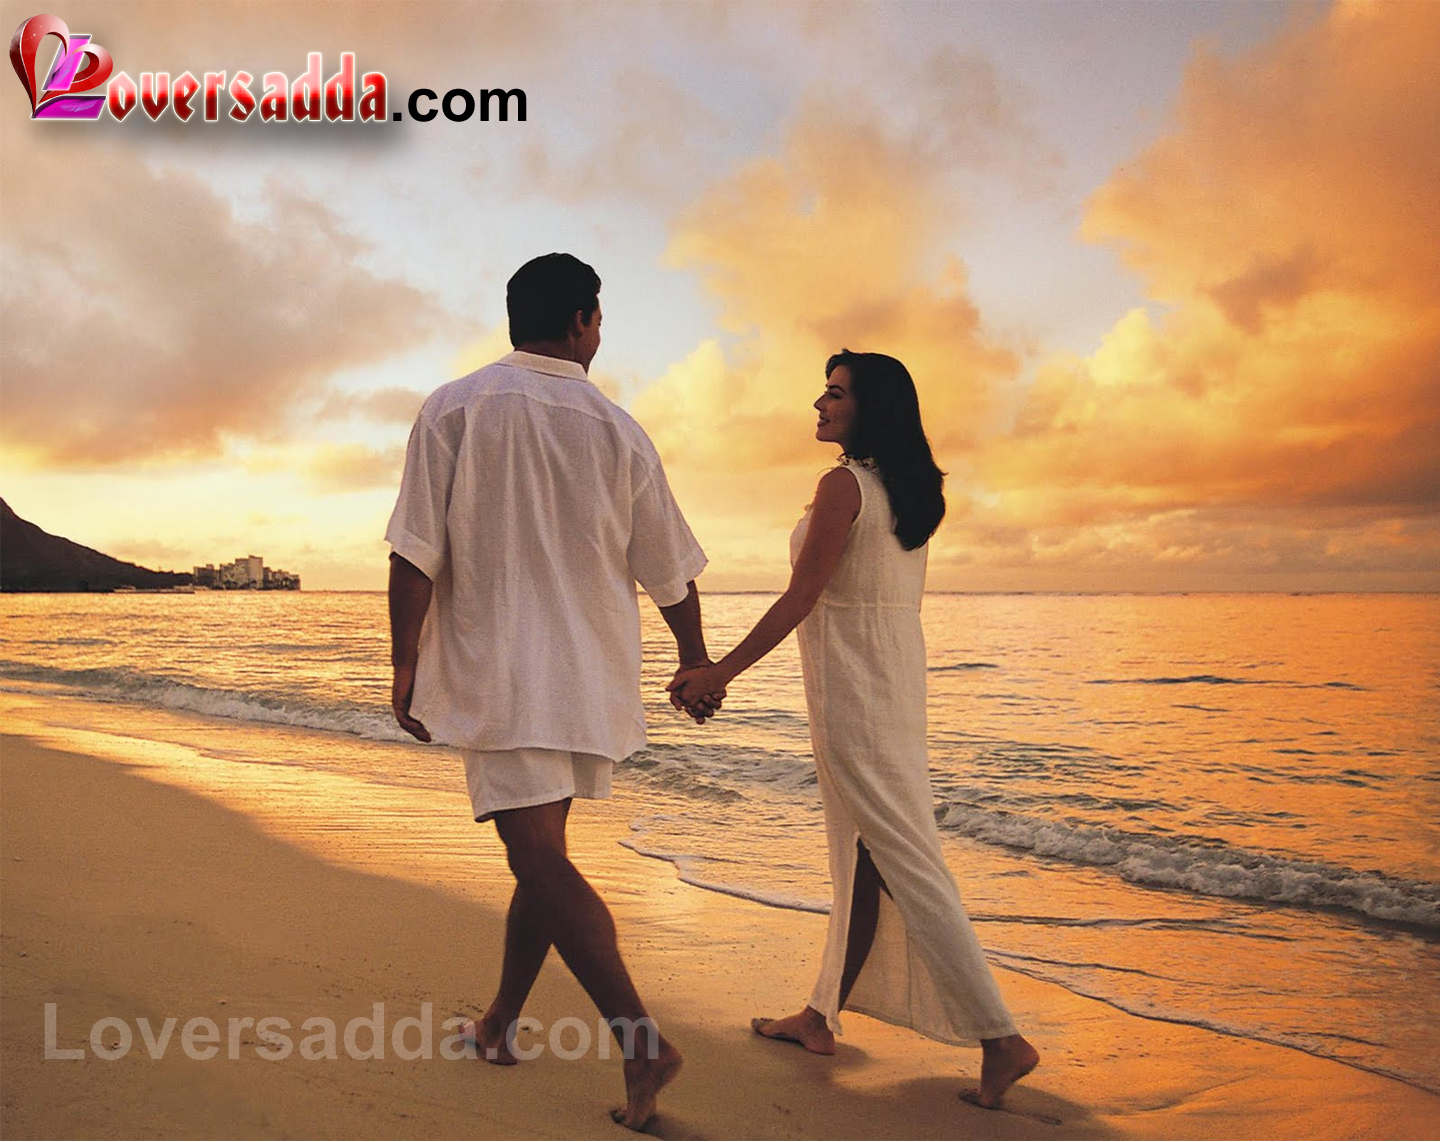 love quotes love images love couple love dreems love greetings simple greetings lovers spot lovers in beach love rumance